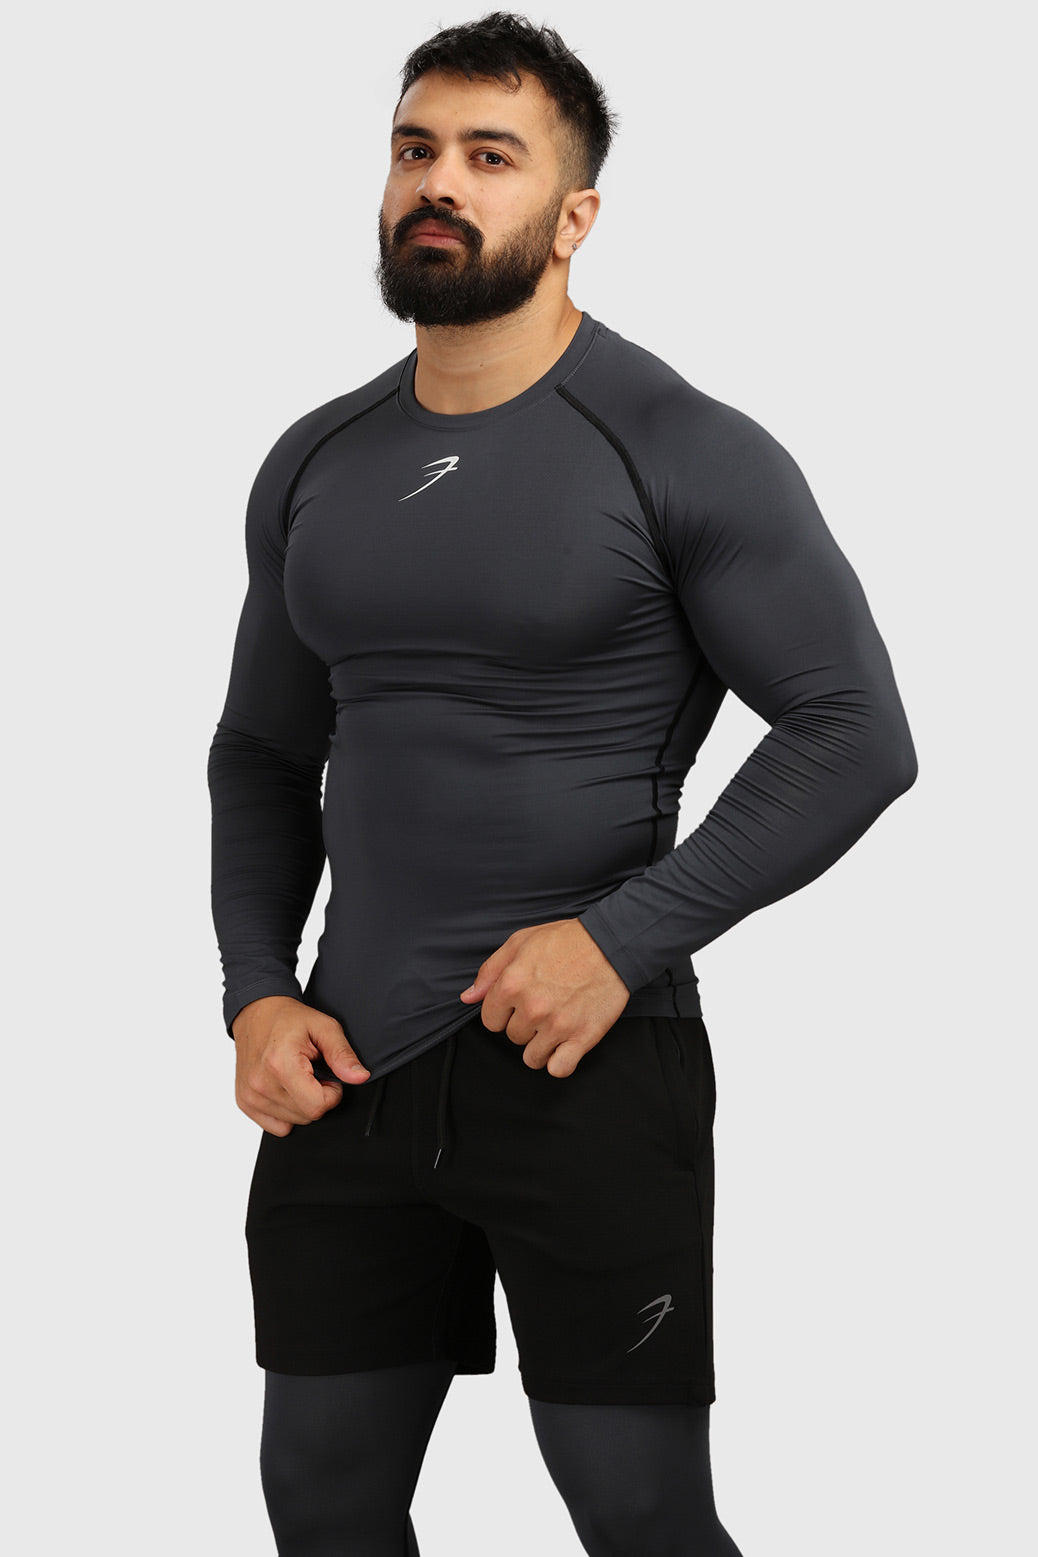 Compression GymX Tee: Carbon Grey at Rs 849.00, खेल-वस्त्र - GYMX  Merchandise LLP, Mumbai